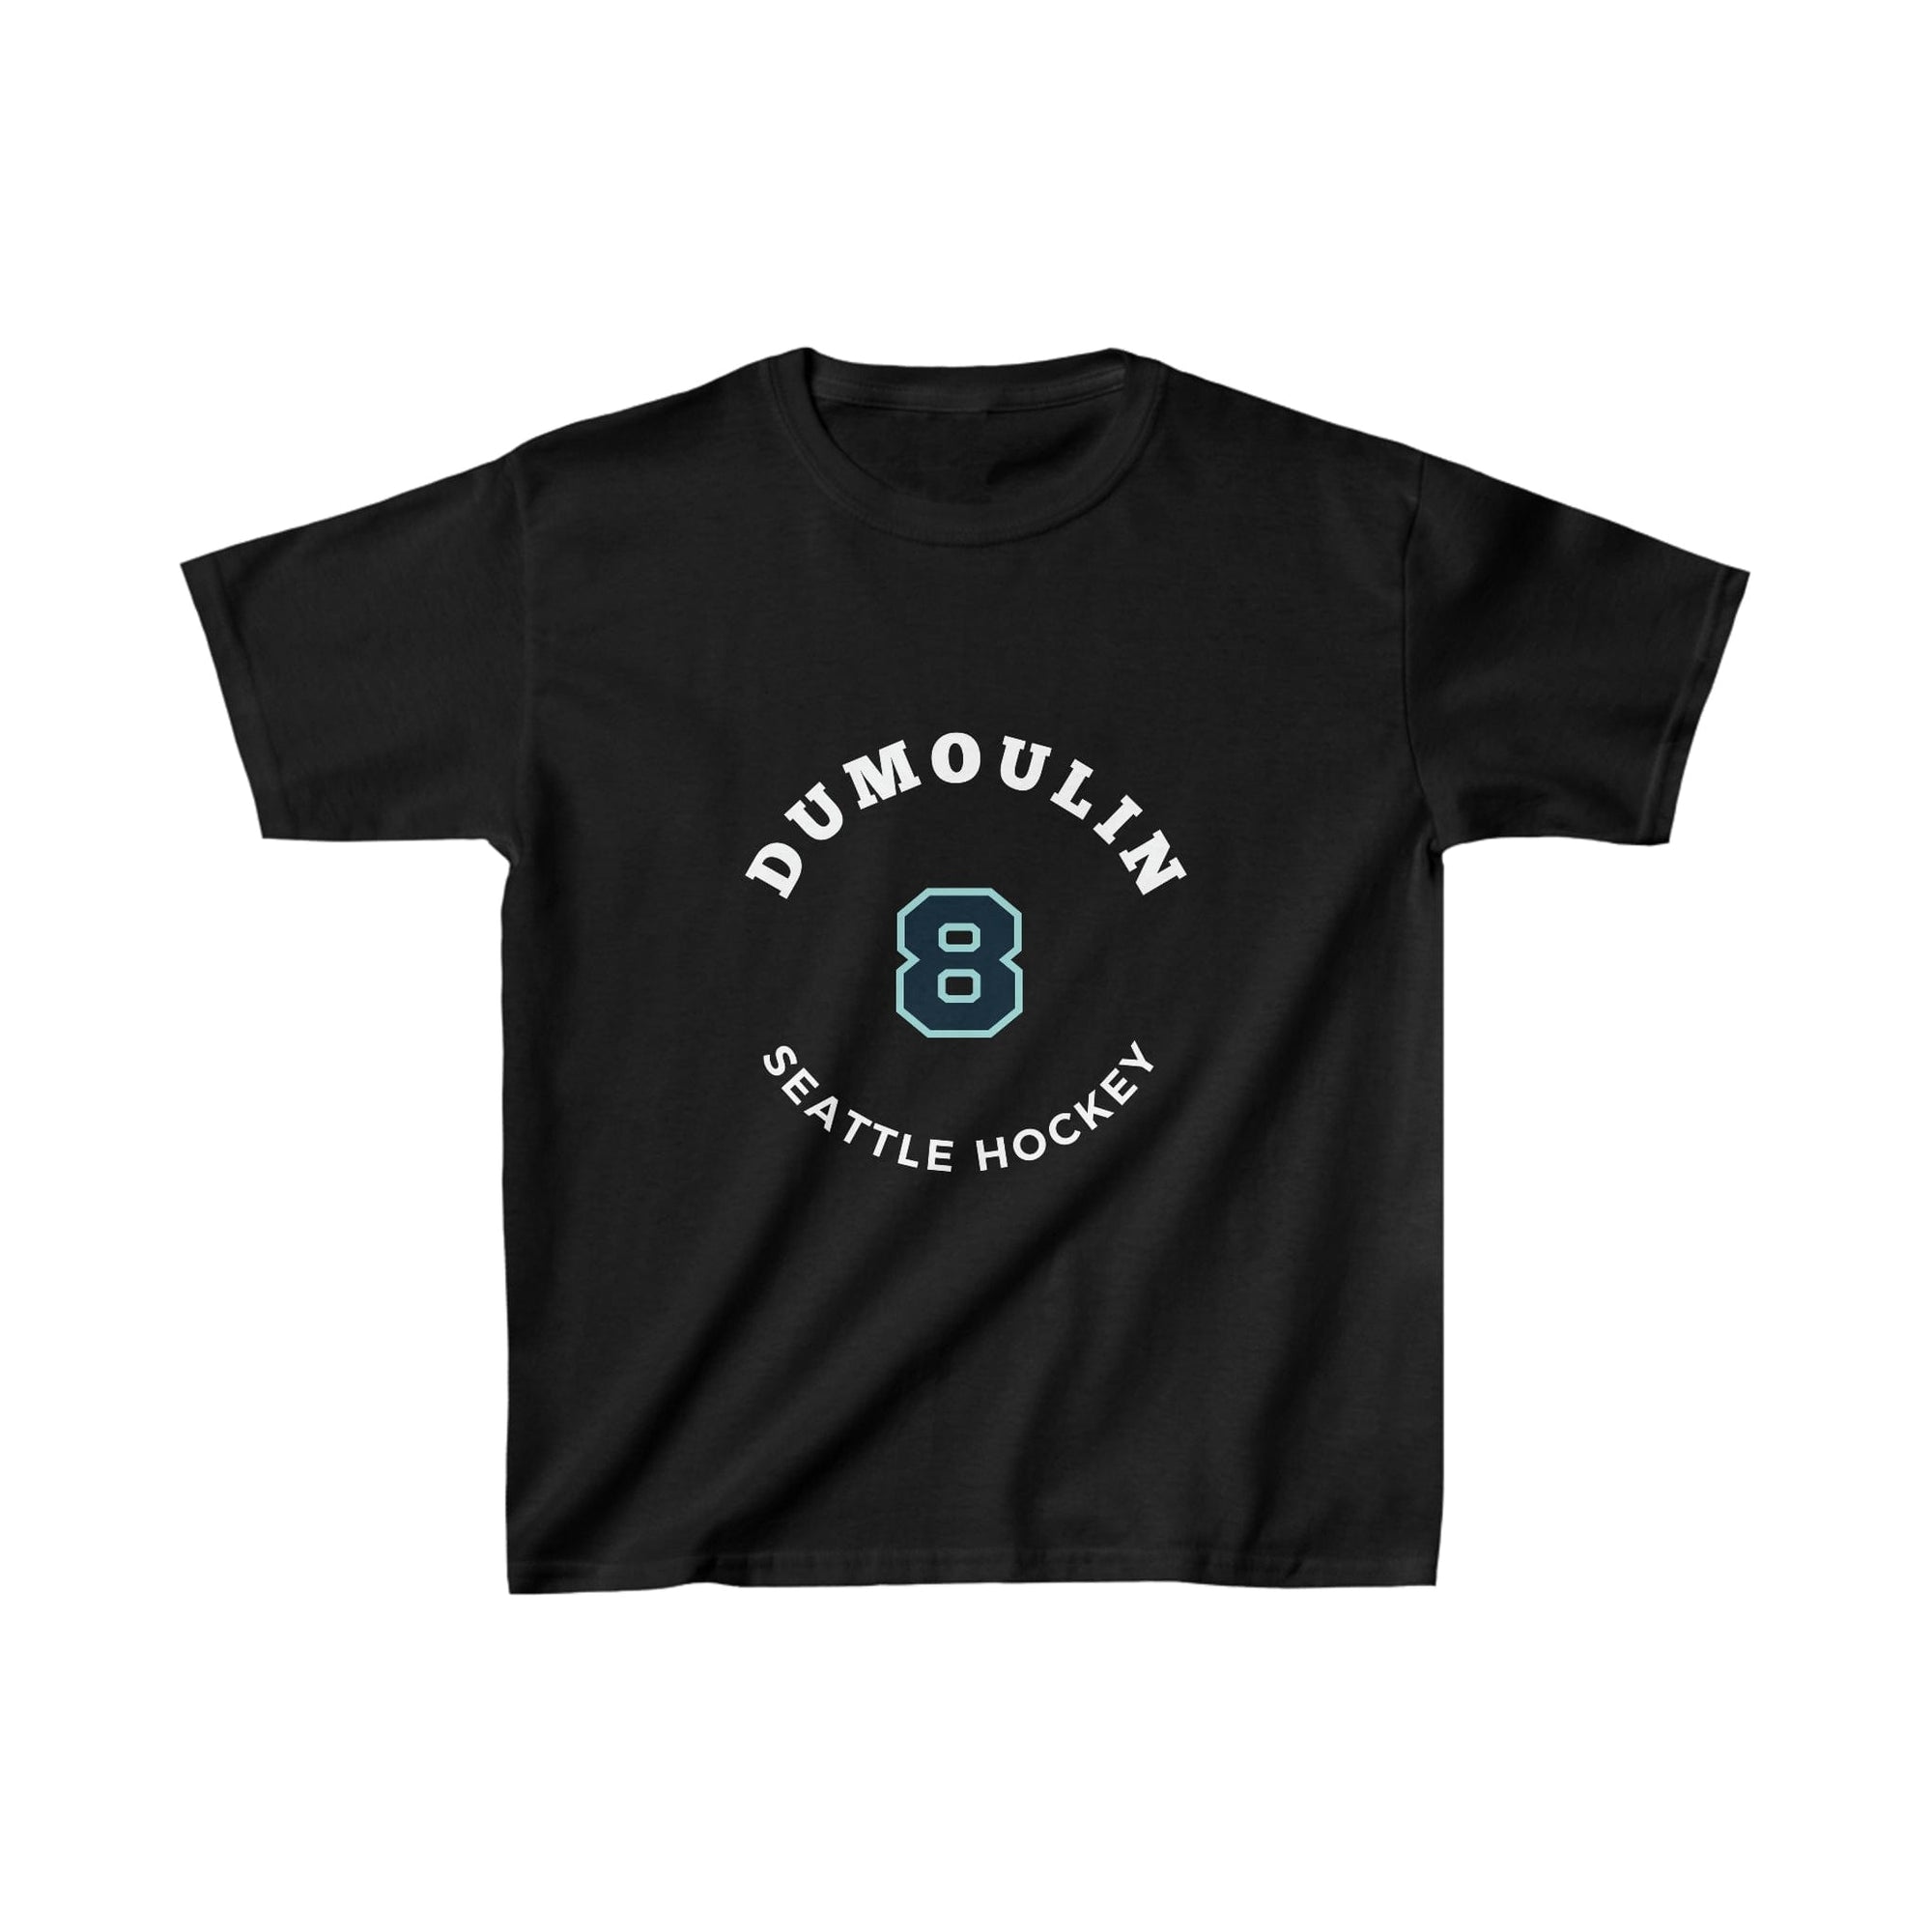 Kids clothes Dumoulin 8 Seattle Hockey Number Arch Design Kids Tee